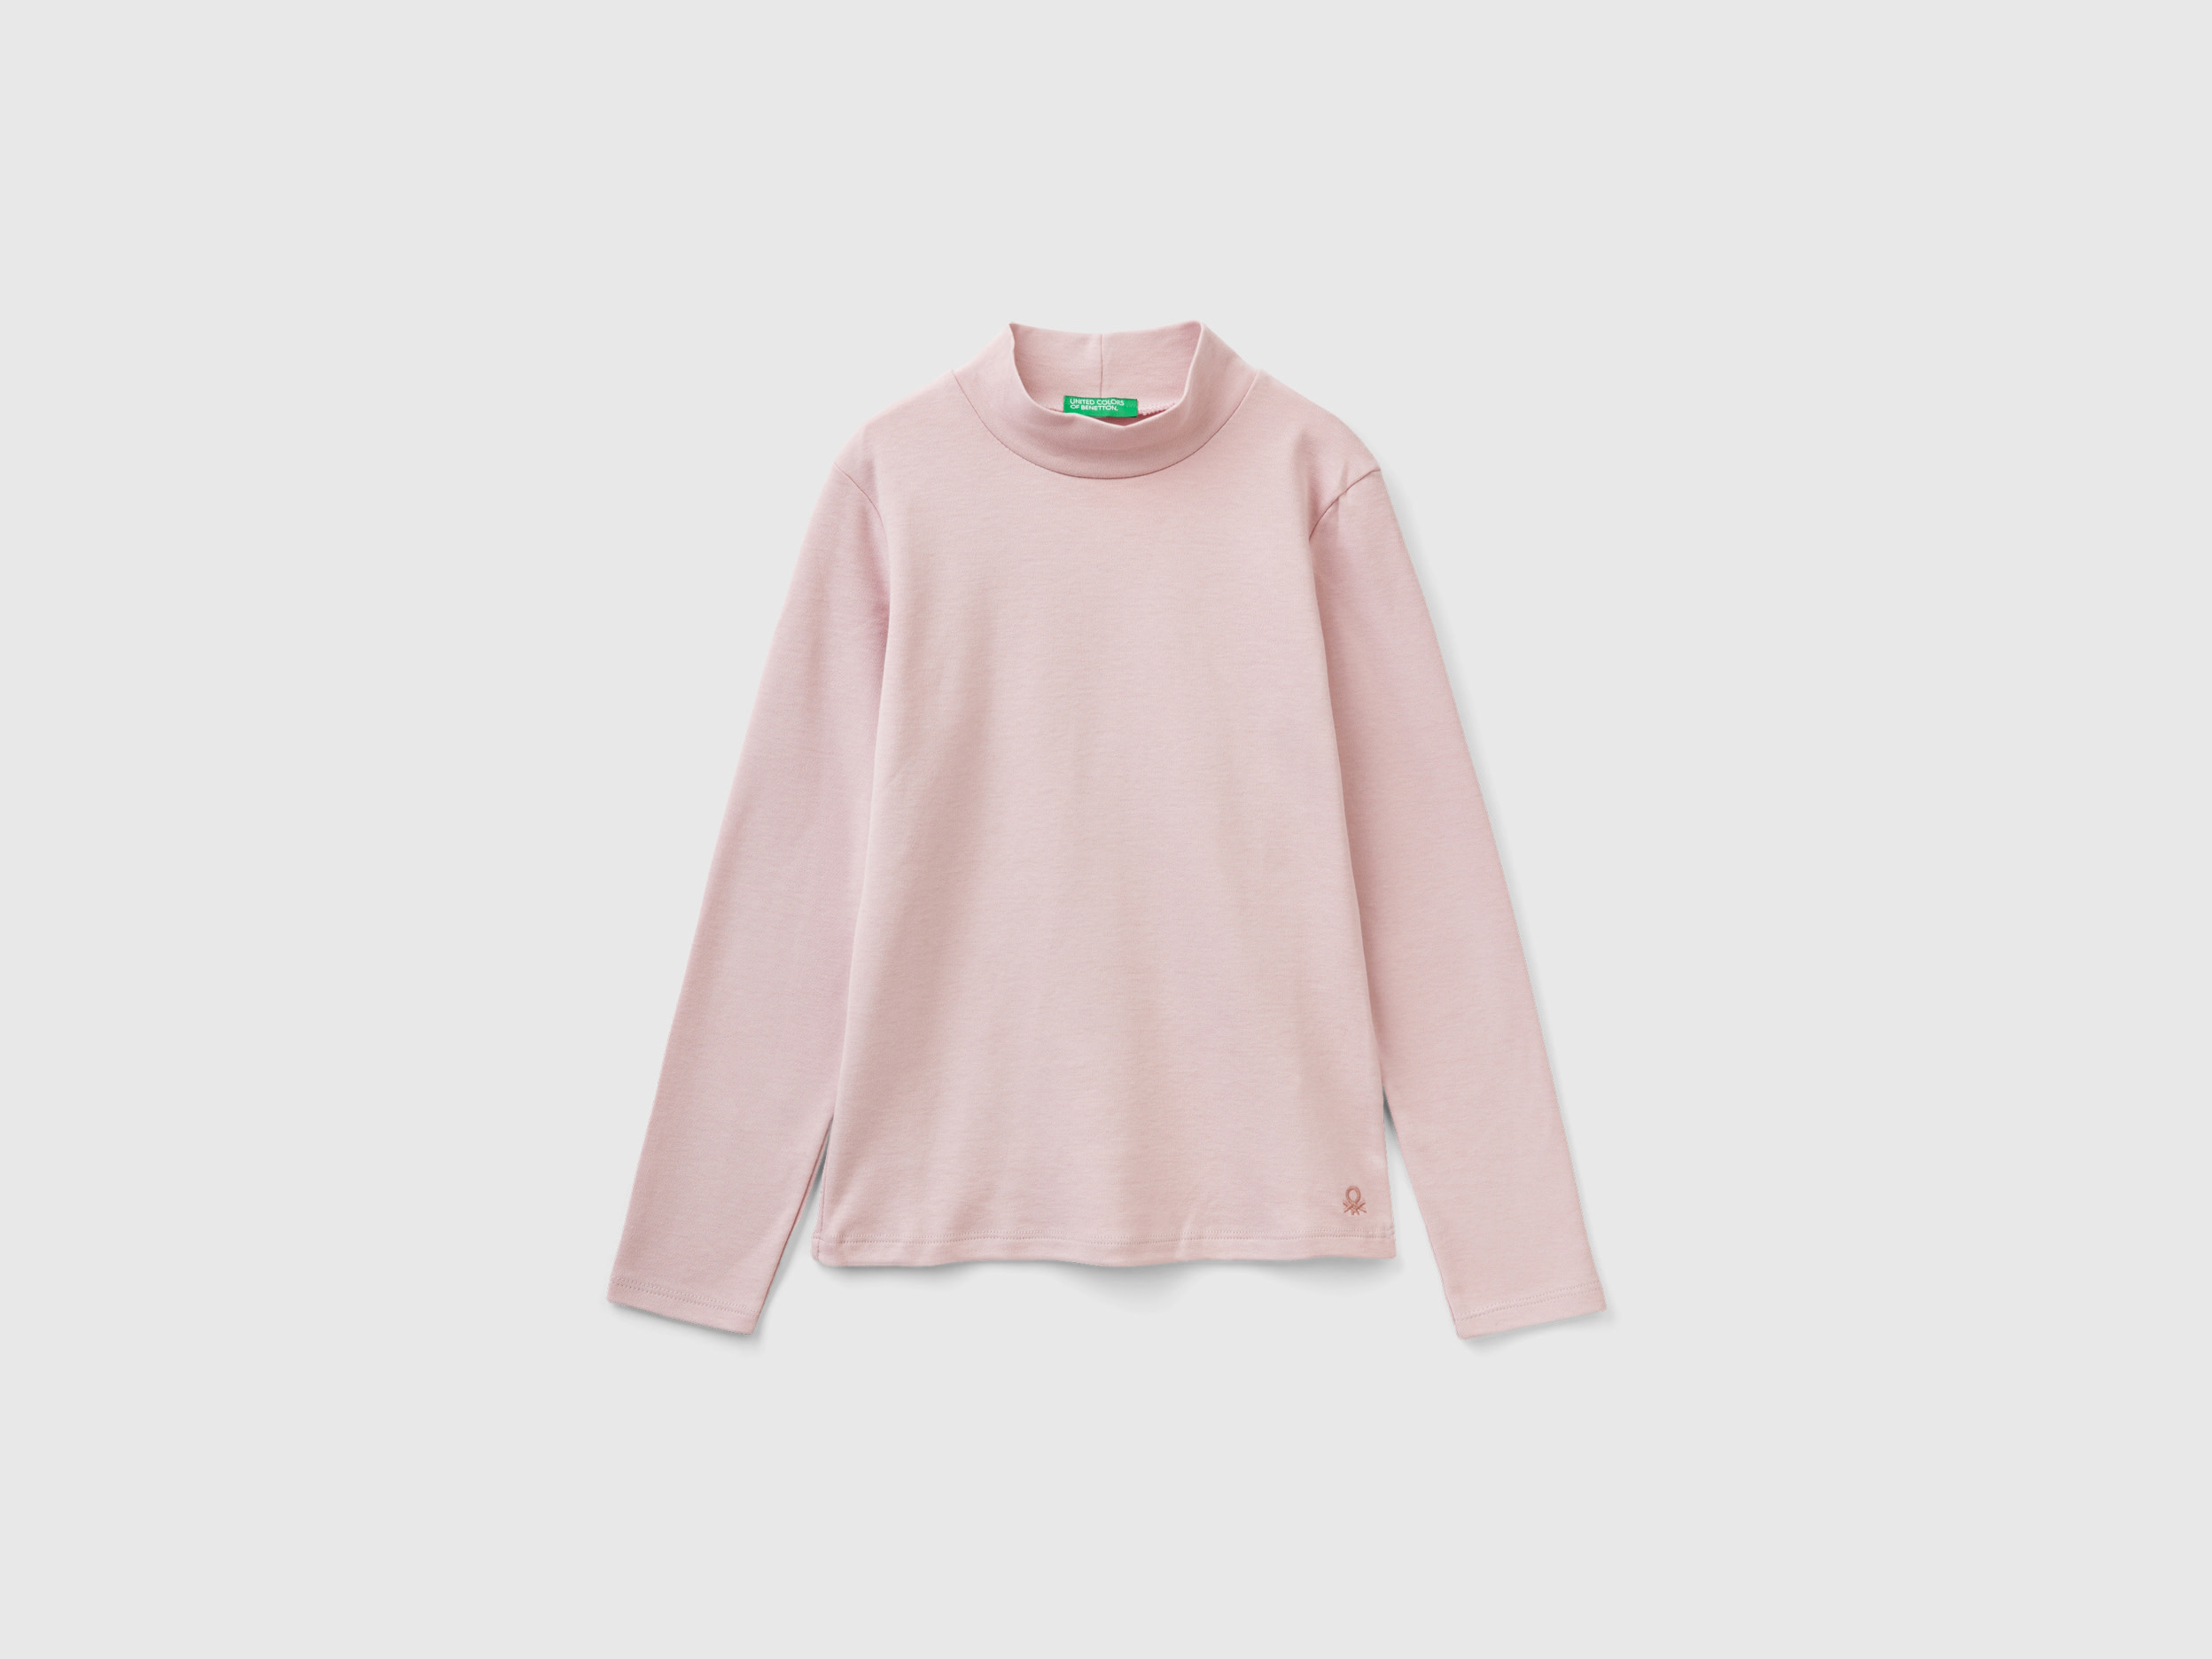 Benetton, T-shirt In Pure Organic Cotton, size L, Pink, Kids